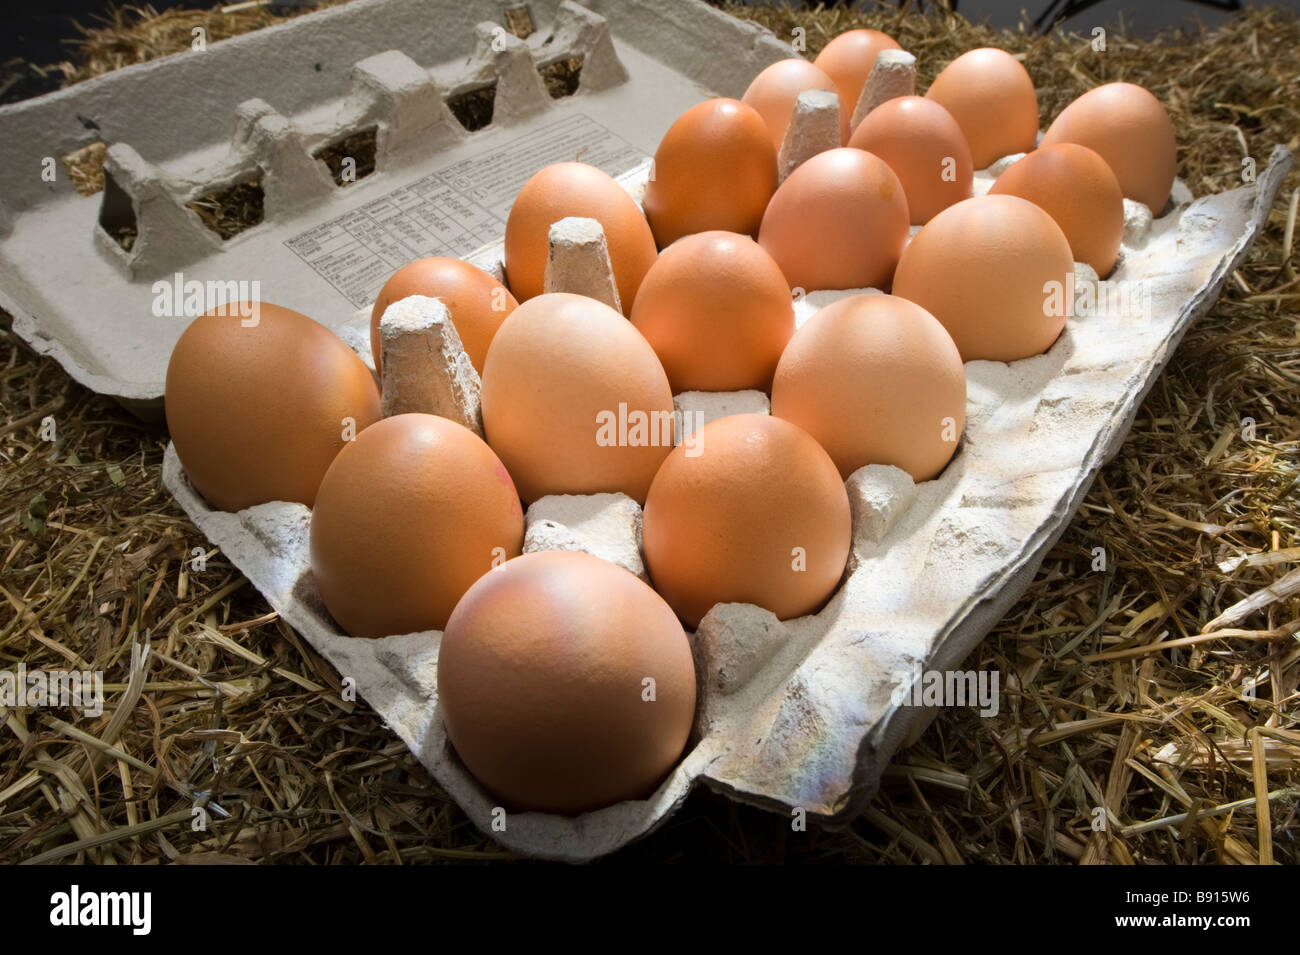 18 brown free-range chicken eggs in a carton on a straw background Stock Photo